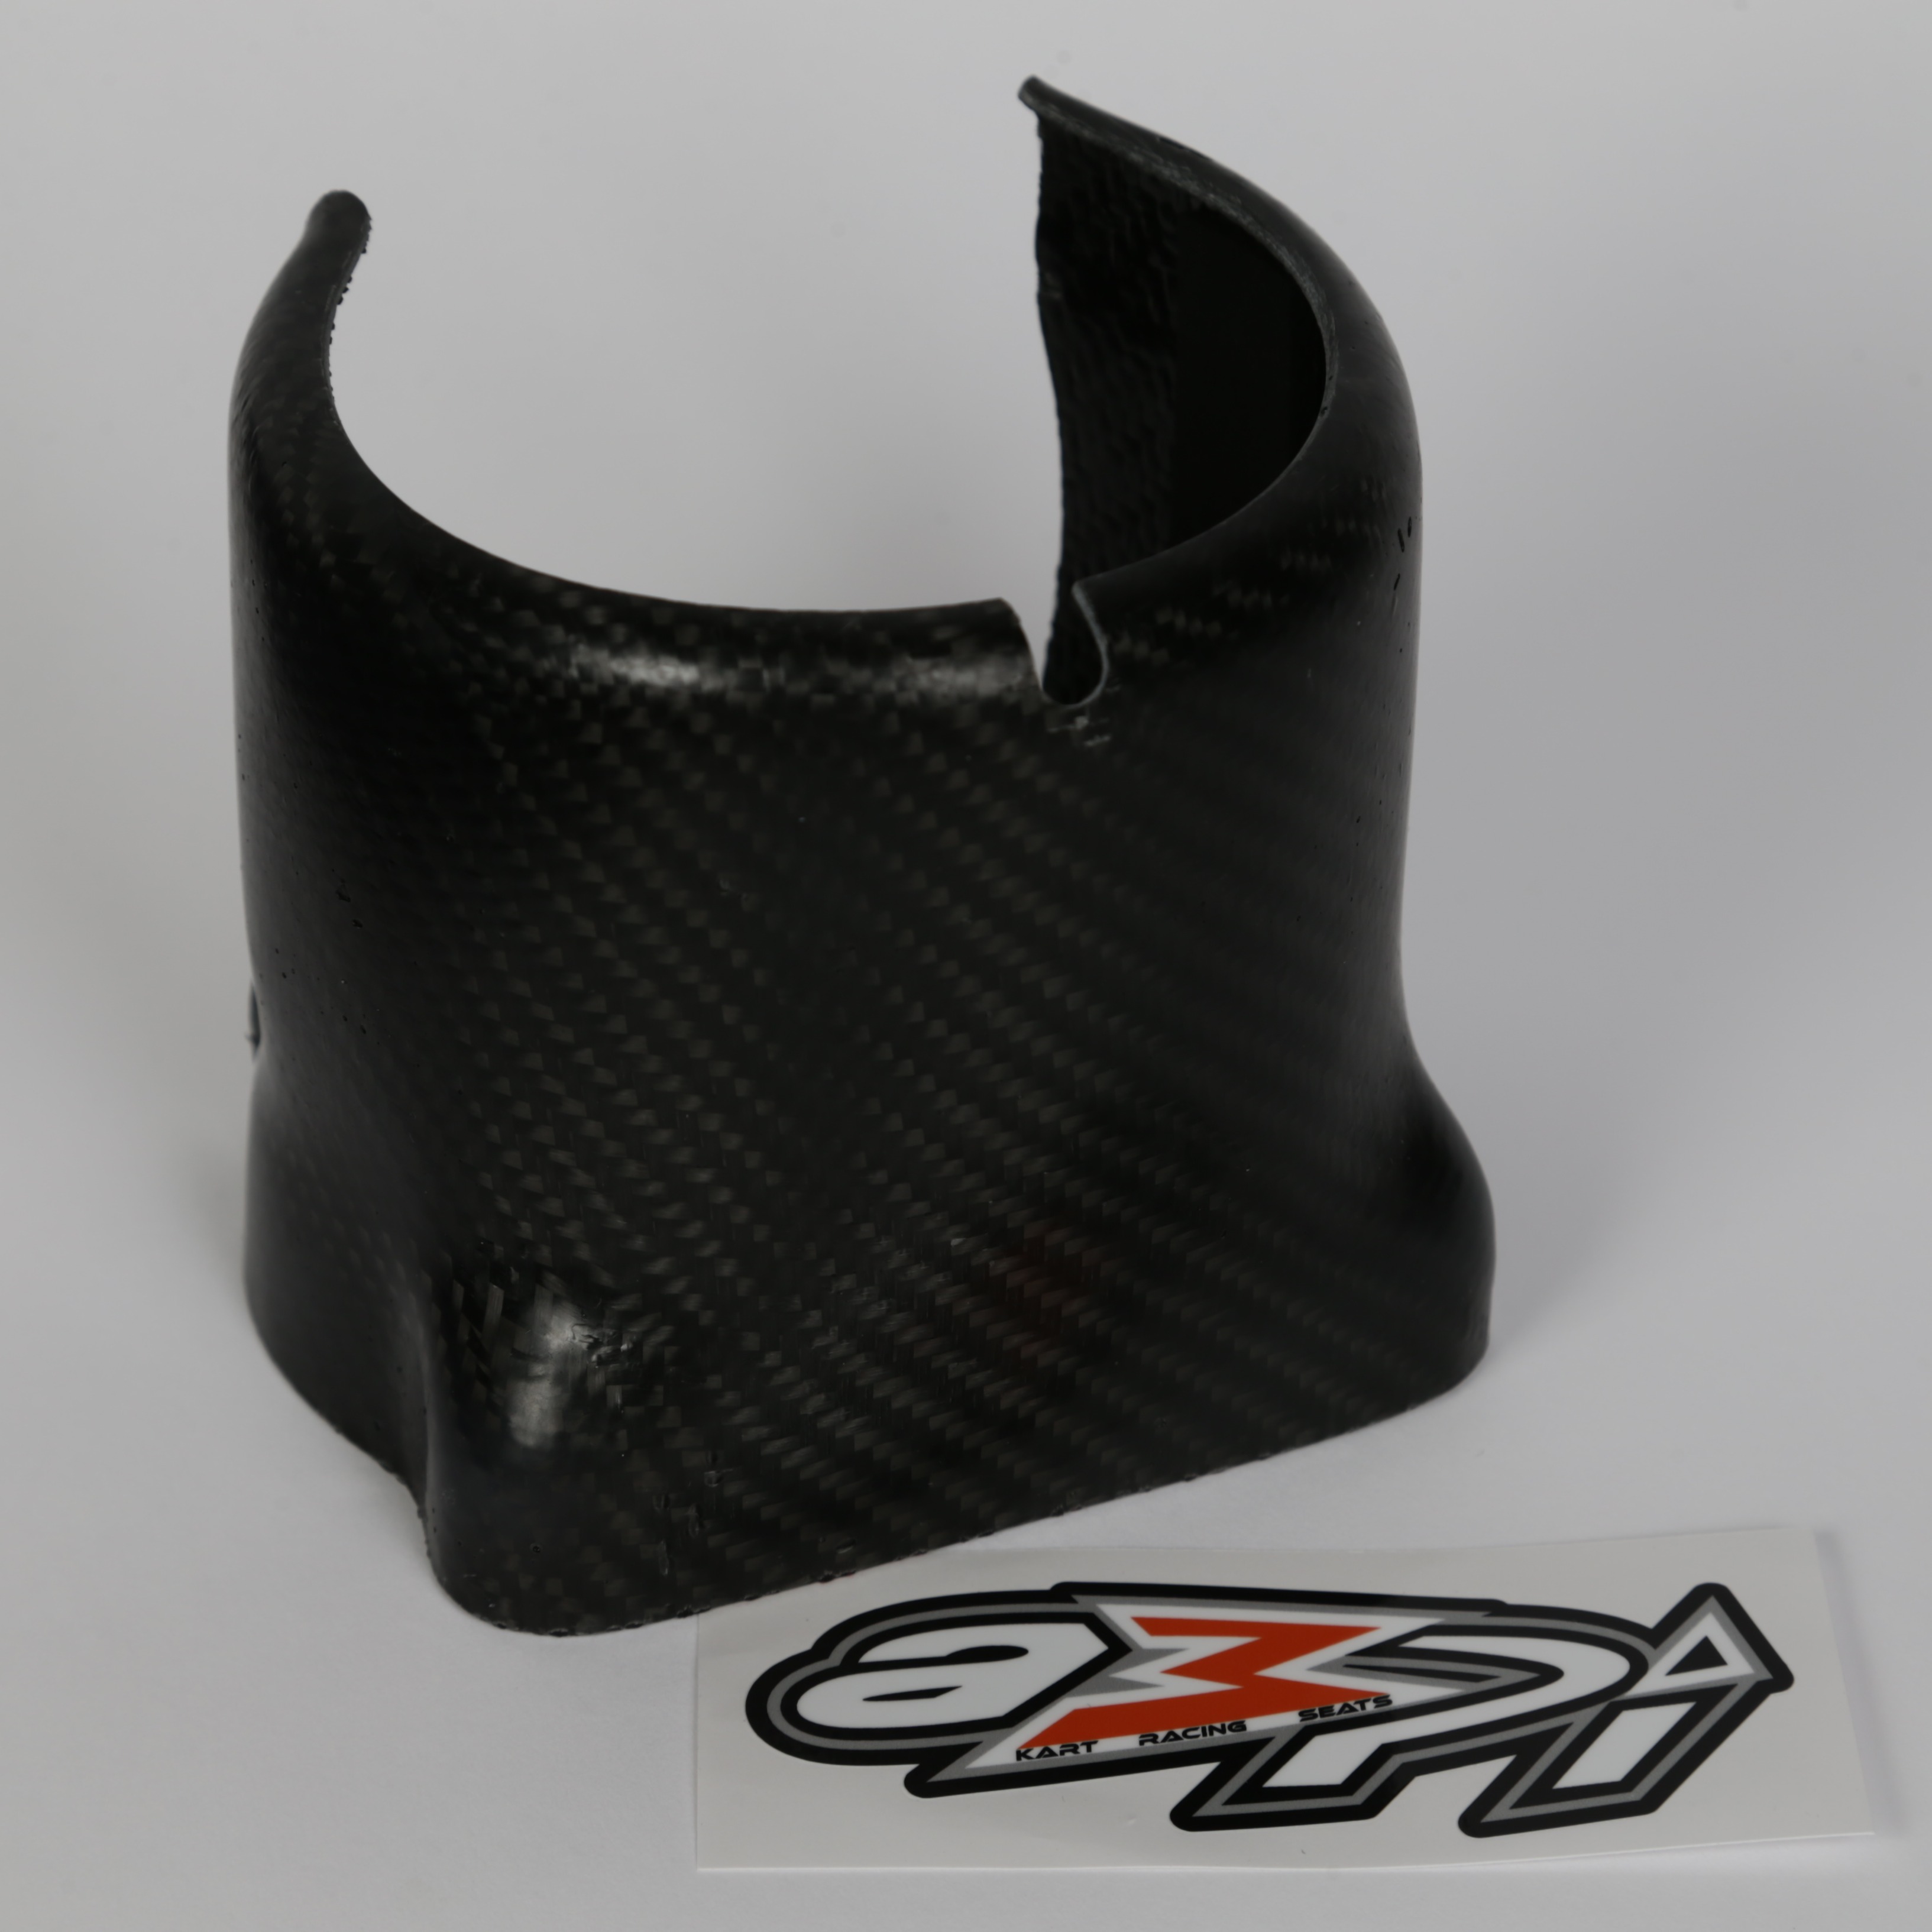 Protections cylindre KZ125 carbone